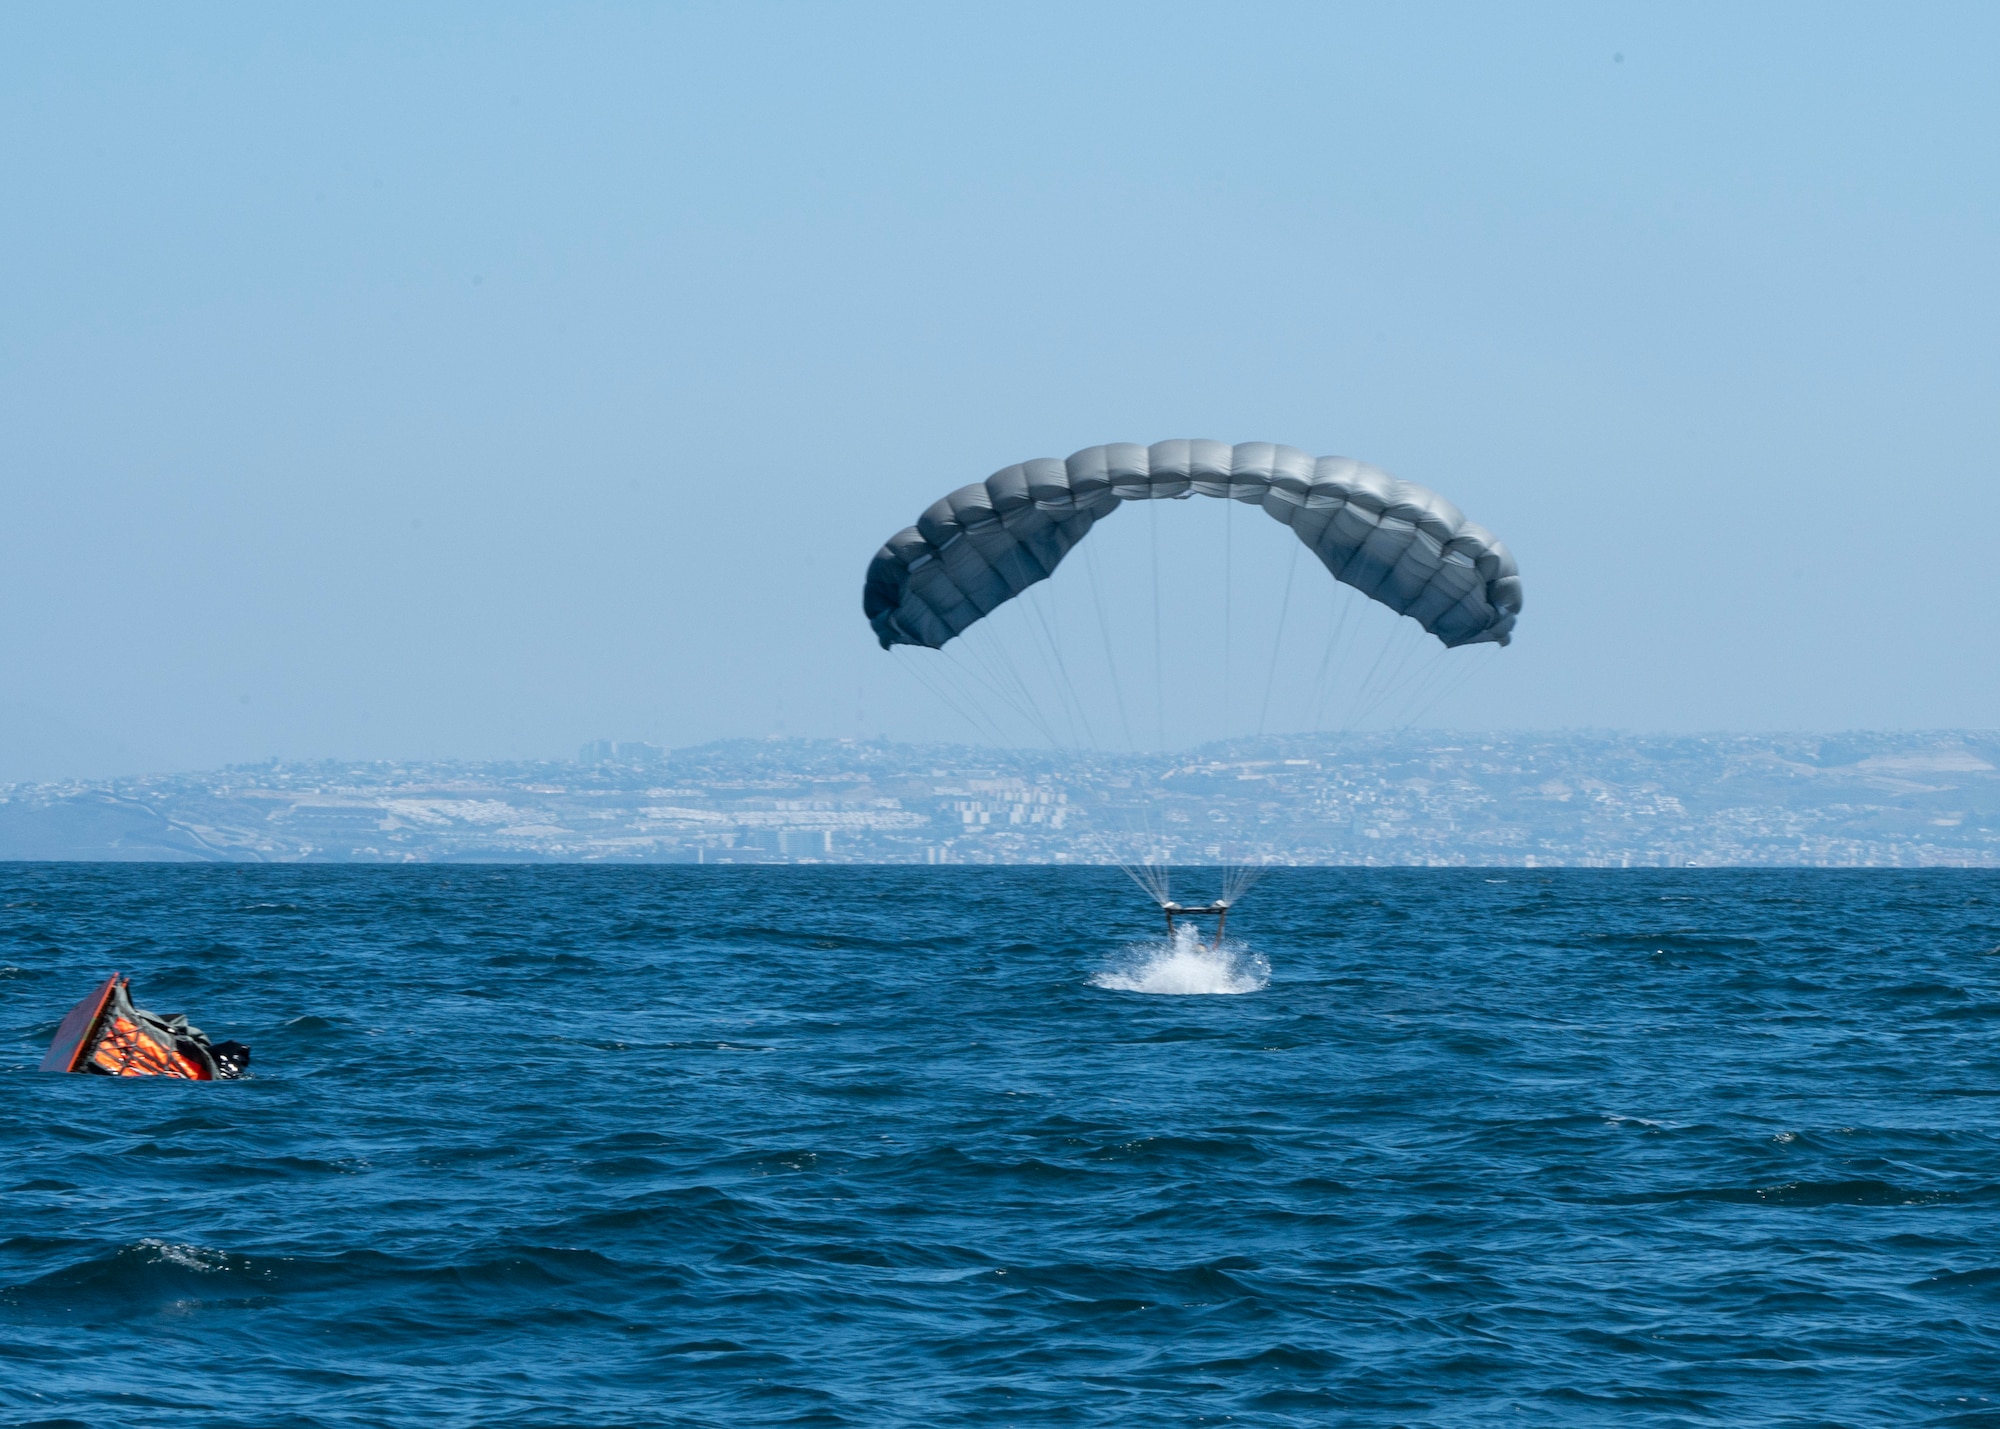 A U.S. Airman, training with the 68th Rescue Squadron, parachutes into a specifically marked drop zone in the ocean near San Diego, Calif., Sept. 6, 2023. The Airman was the first of his team to land at the drop zone and was required to swim to and begin setting up a Rigged Alternate Method Boat. (U.S. Air Force photo by Airman 1st Class William Finn V)